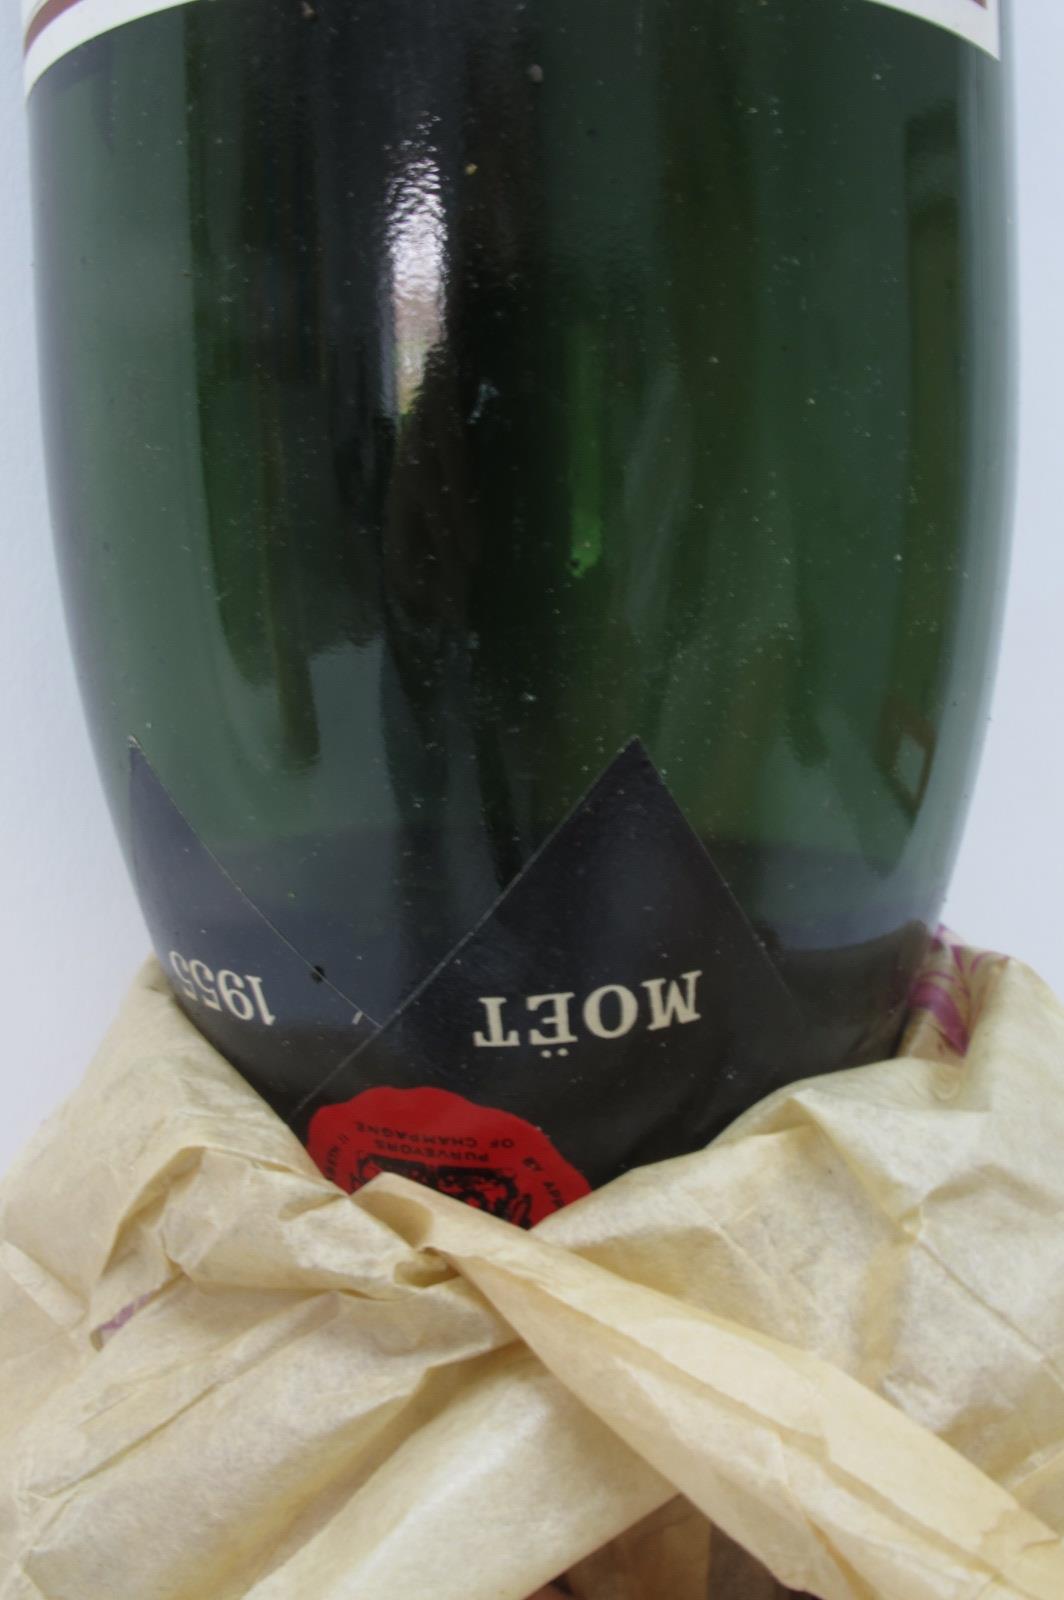 Champagne - Moet & Chandon Dry Imperial Champagne 1955, six bottles in original paper wrappers and - Image 12 of 13